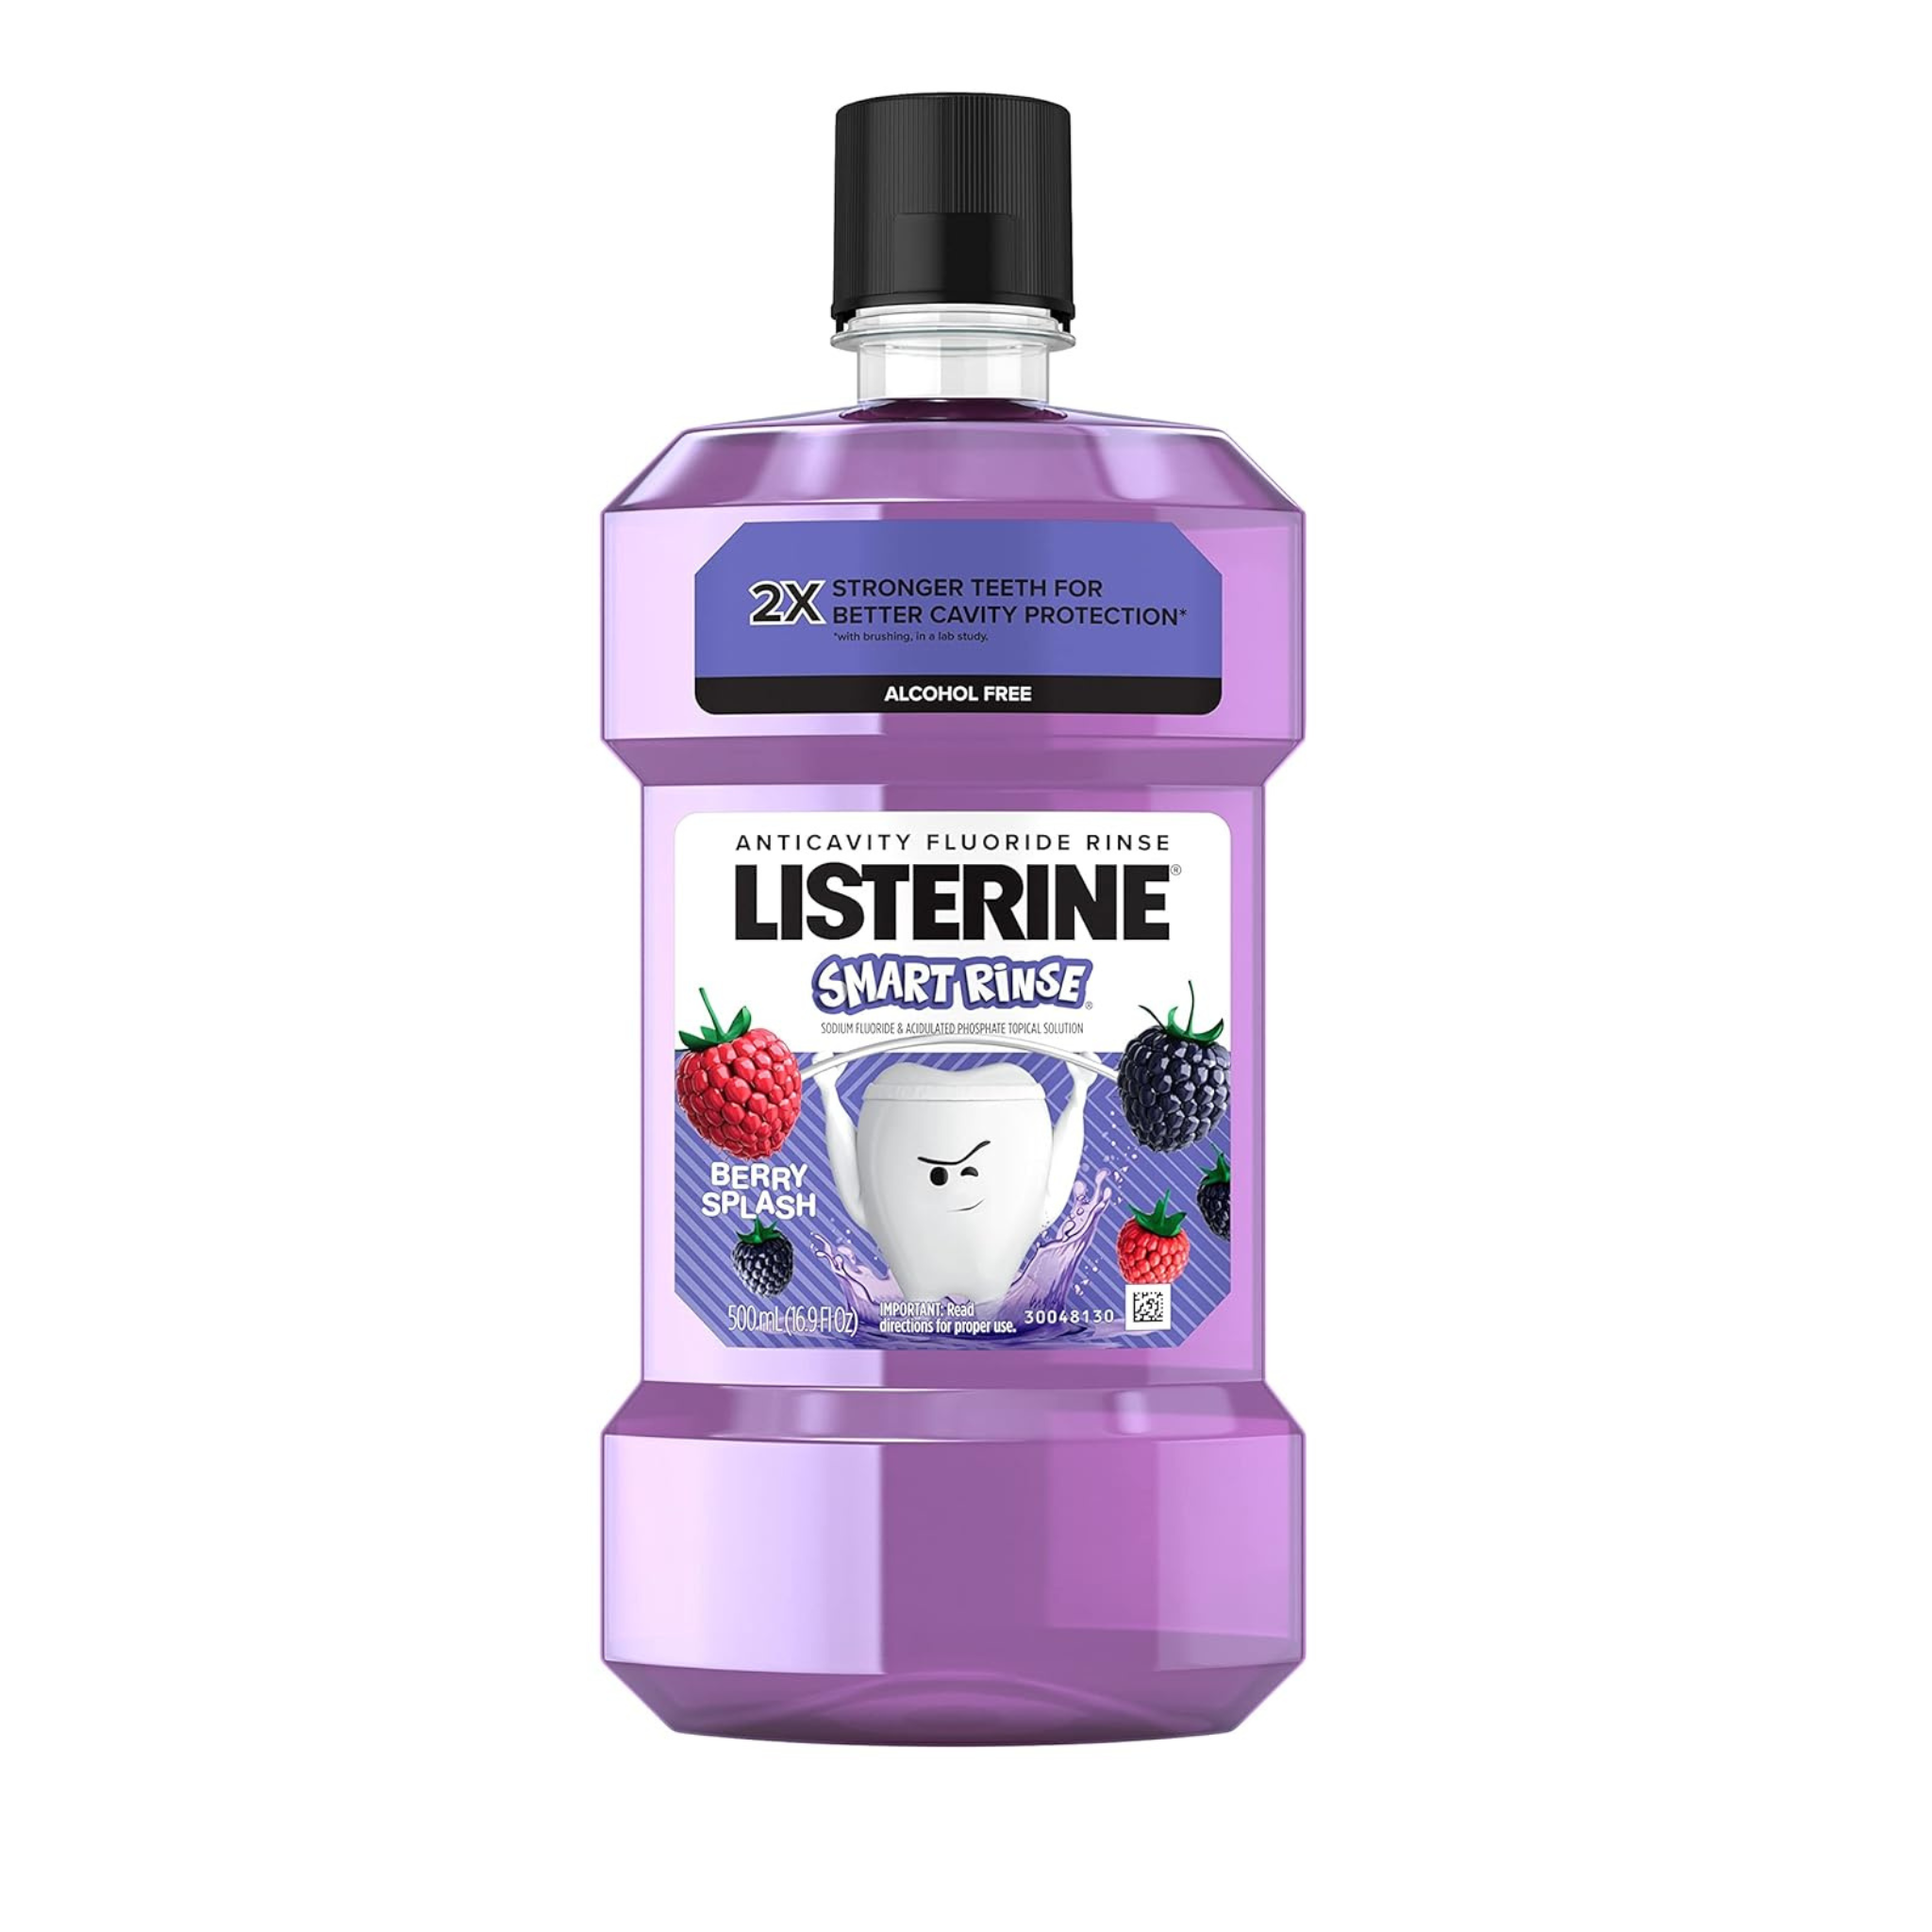 Listerine Smart Rinse Kids Alcohol-Free Anticavity Fluoride Mouthwash for Cavity Protection, Berry Splash Flavor, 500 mL